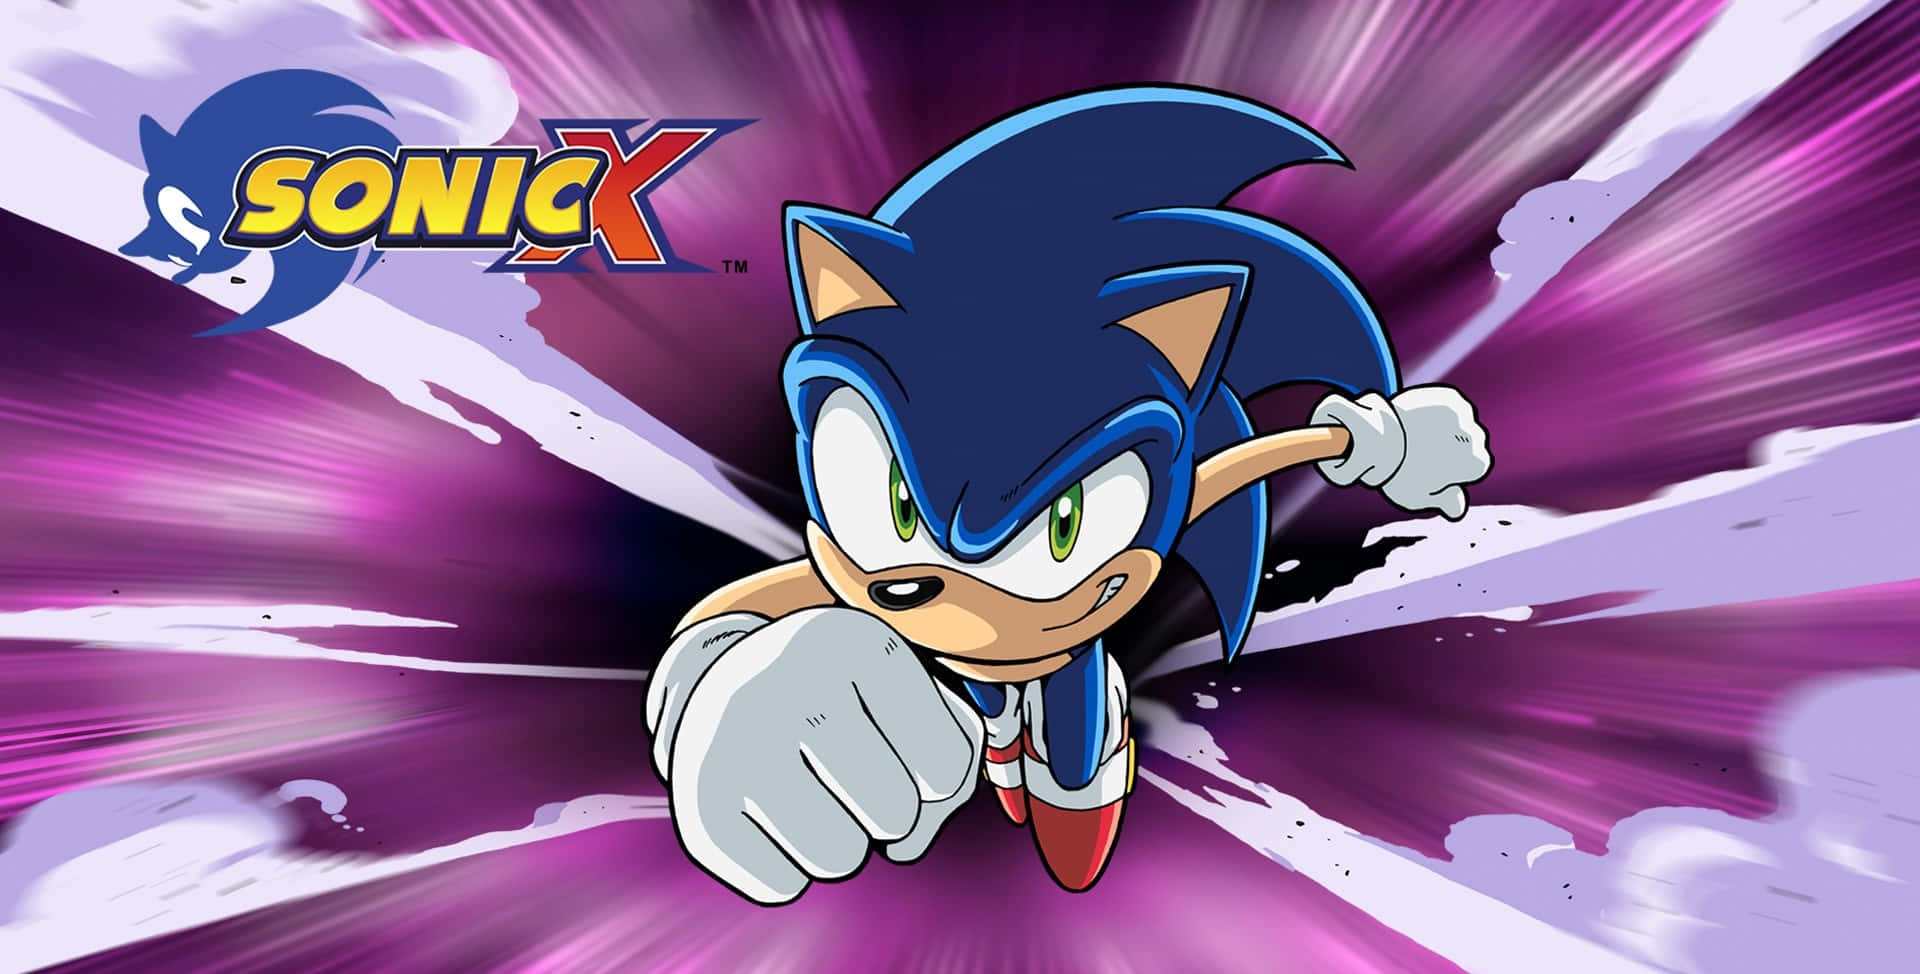 Sonic X Wallpaper - Action-packed scene featuring iconic characters from the series Wallpaper